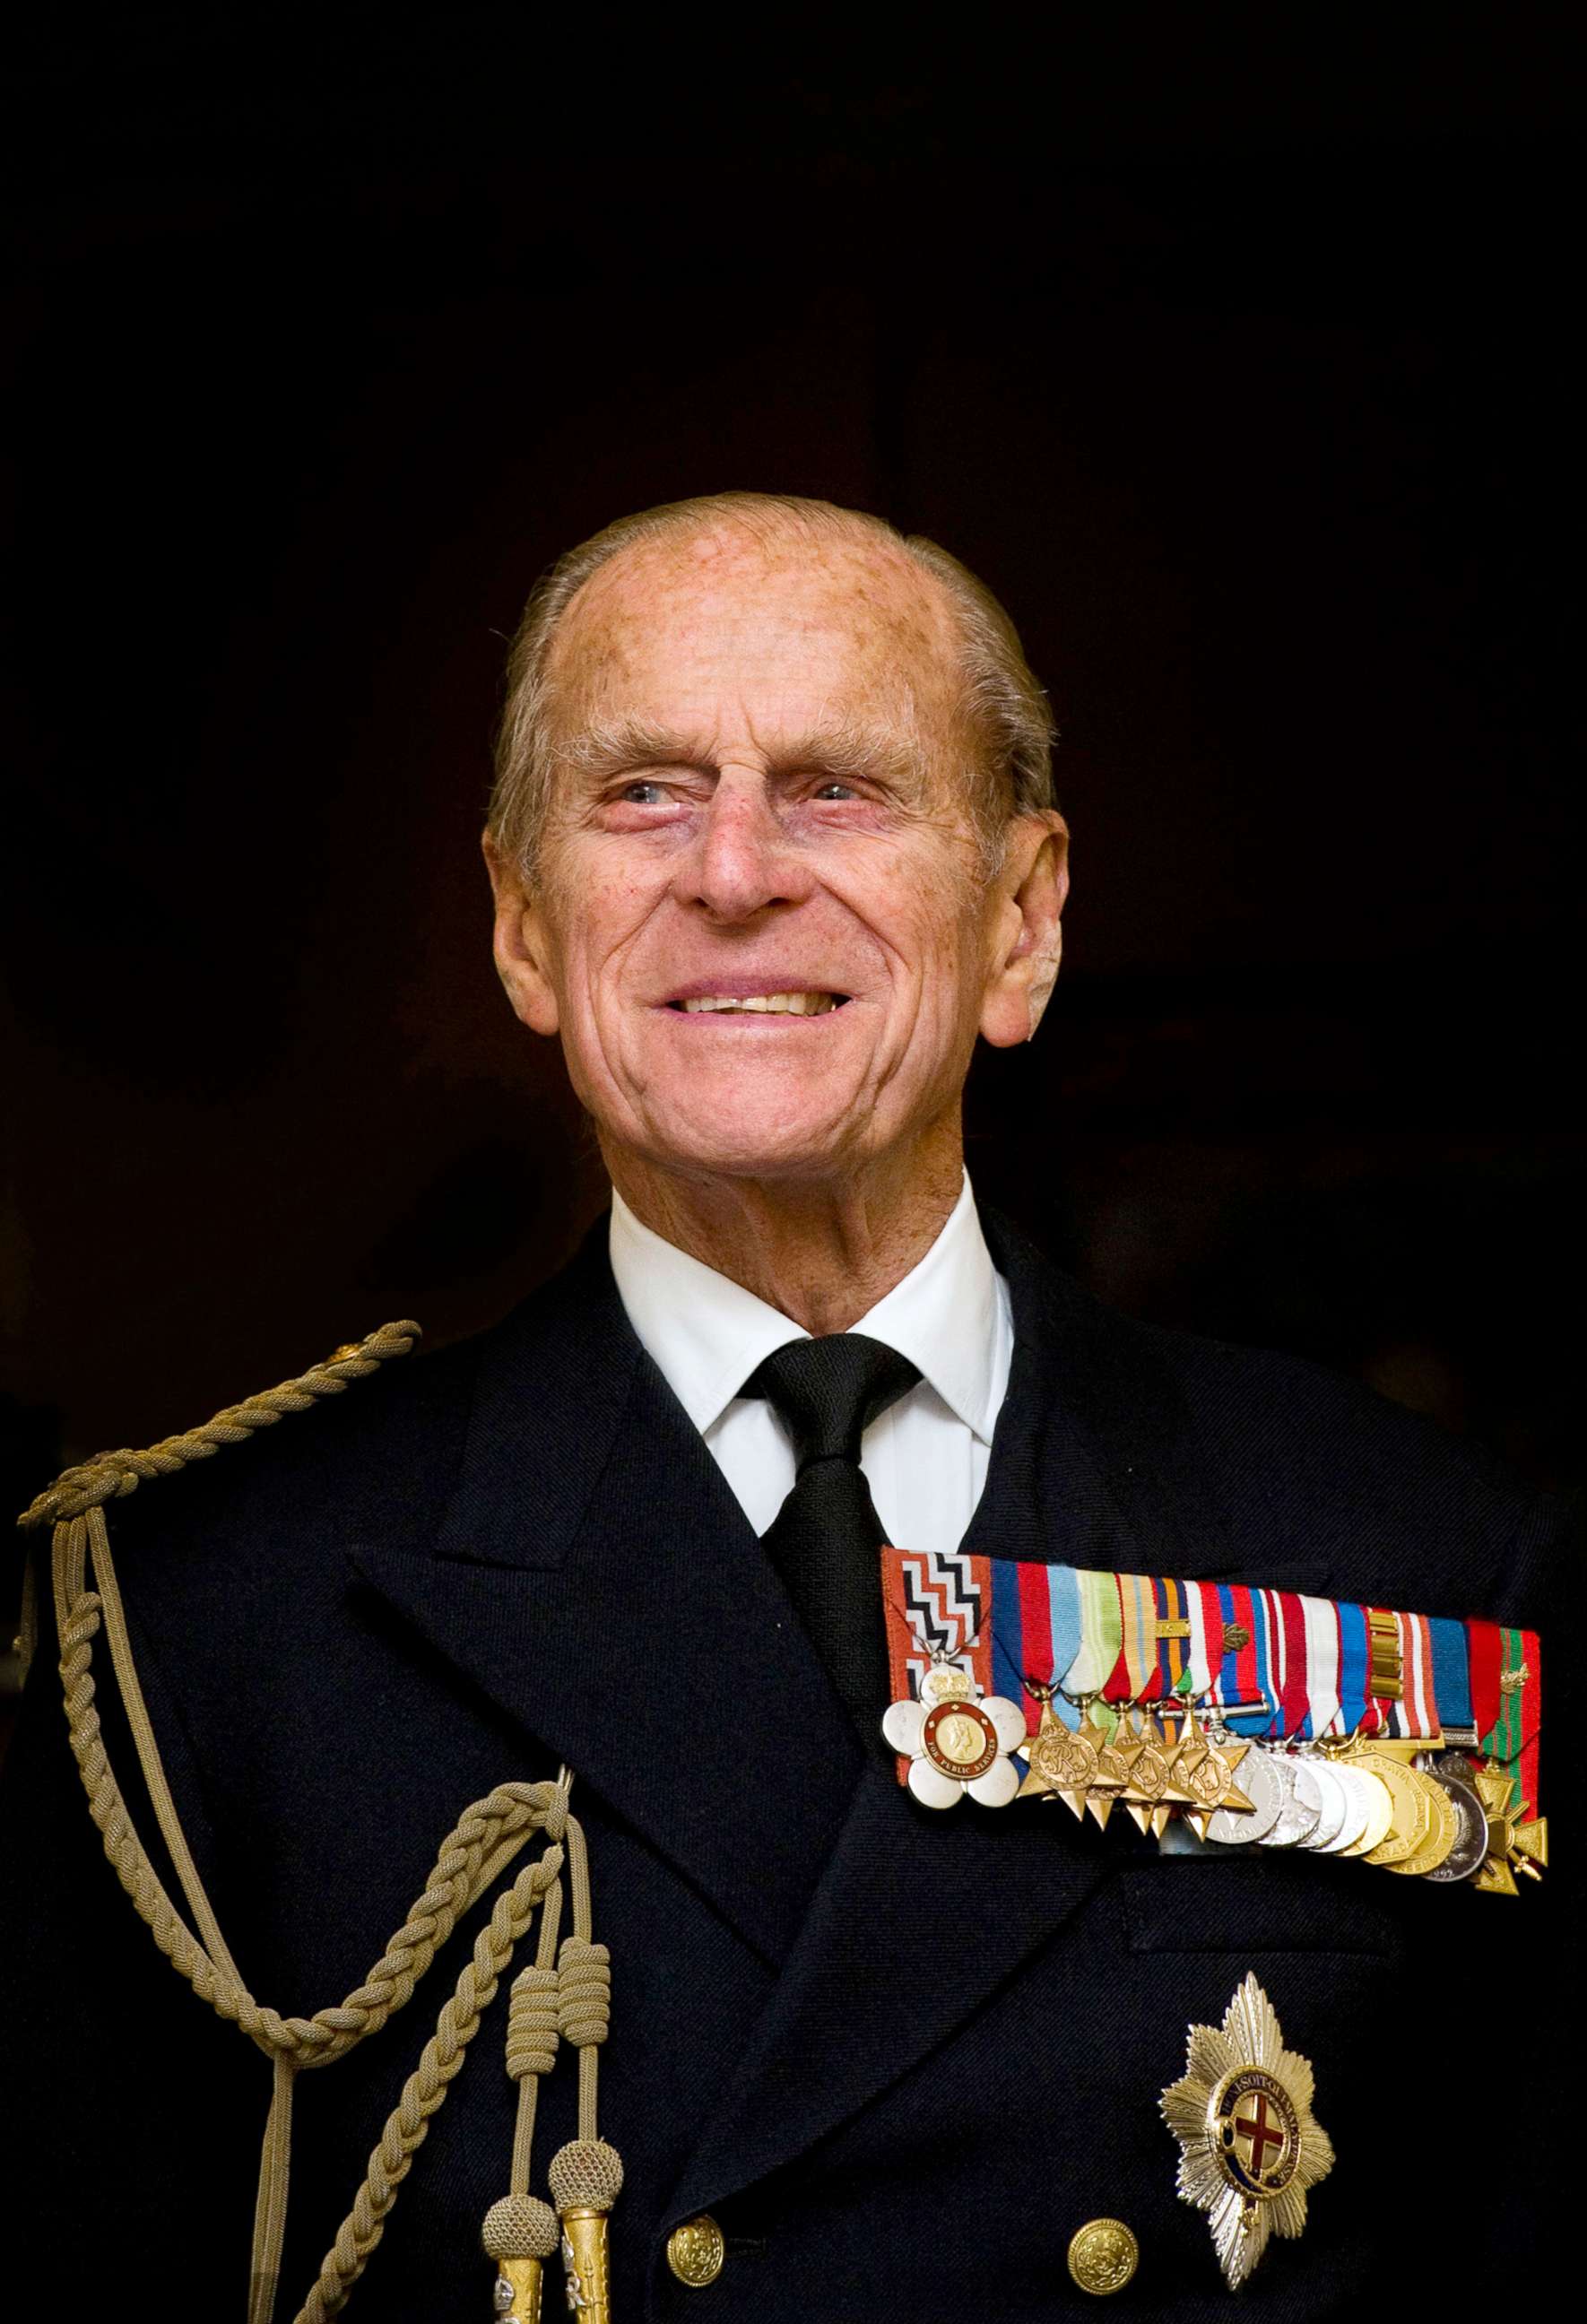 PHOTO: Prince Philip, Duke of Edinburgh smiles during a visit to the Admiralty Board and Admiralty House on Nov. 23, 2011, in London.